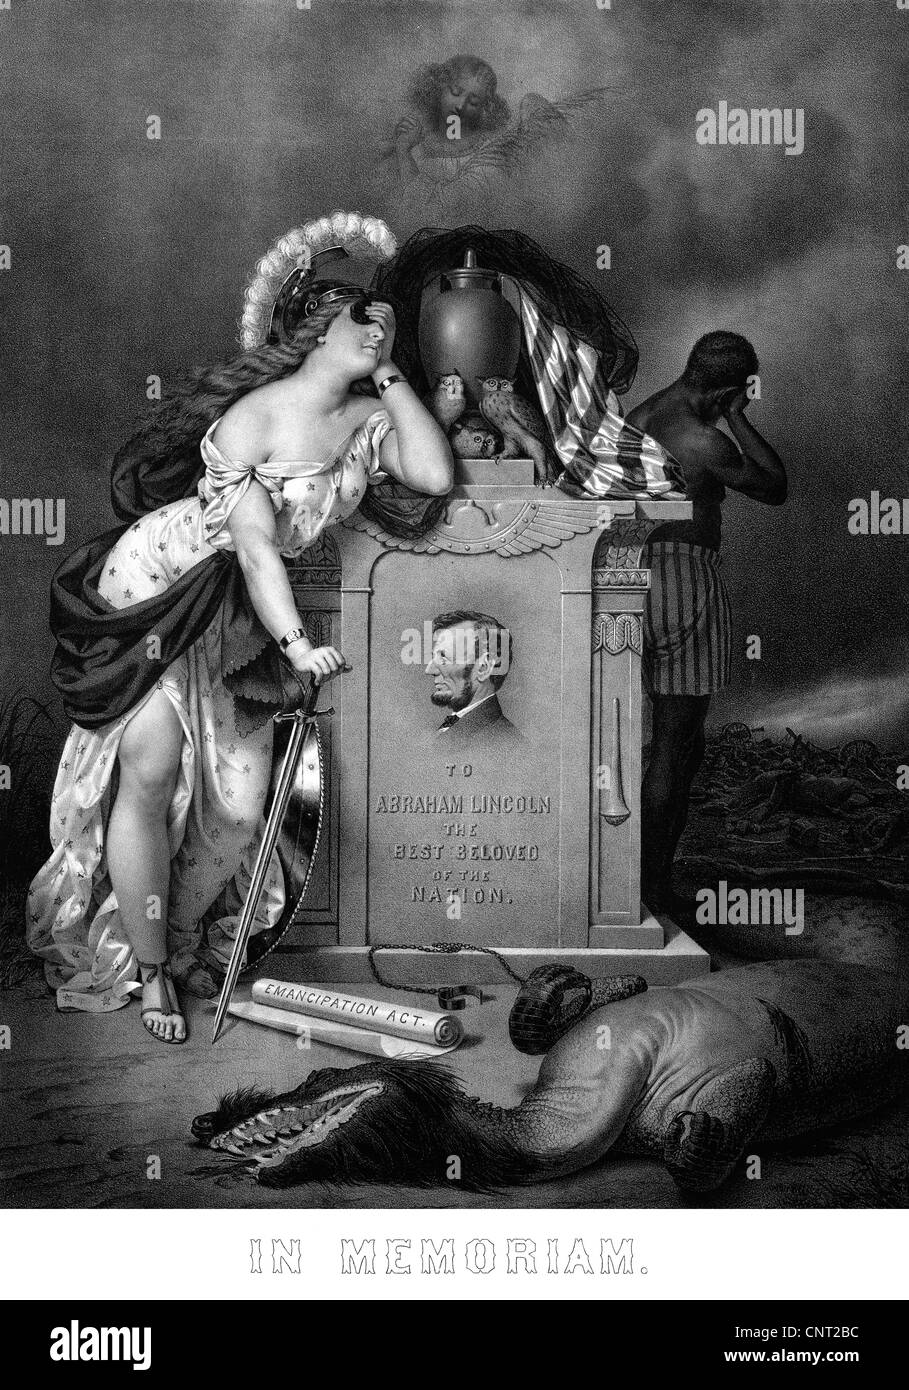 Digitally restored Civil War print showing Lady Liberty and a former slave mourning at the grave of President Abraham Lincoln. Stock Photo